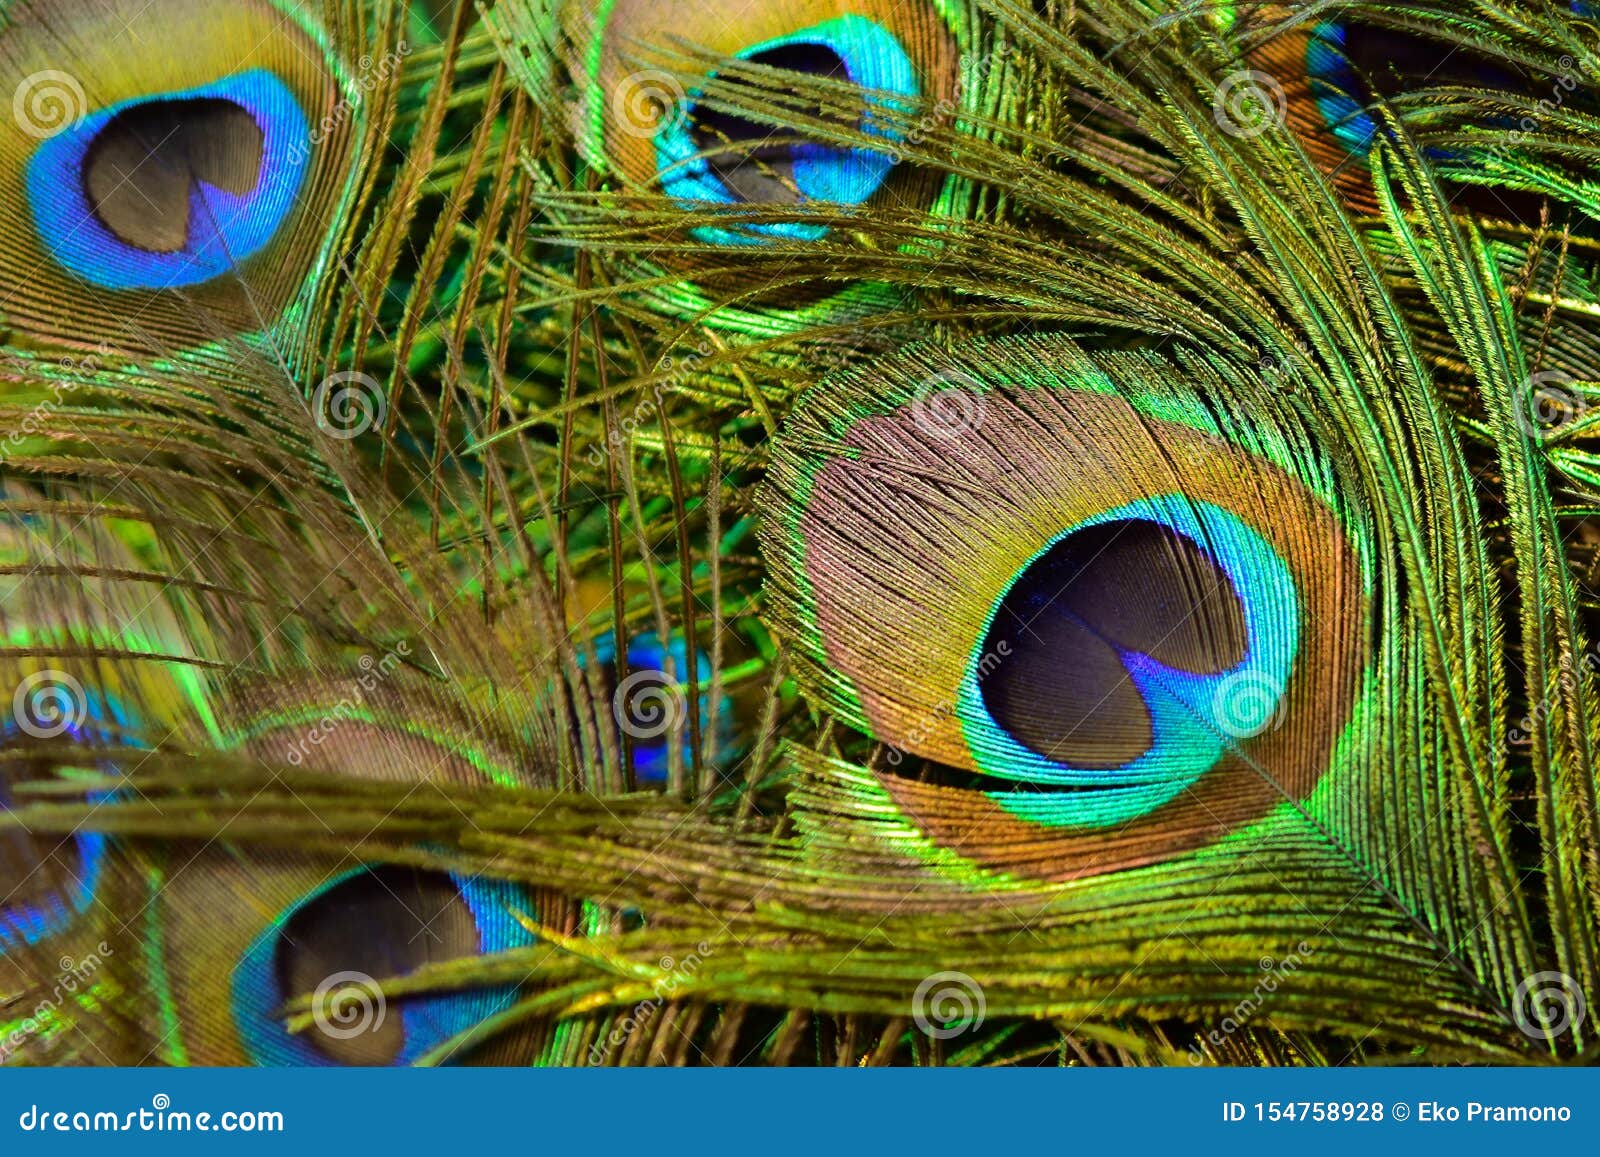 Colorful and Artistic Peacock Feathers. this is a Macro Photo of an ...